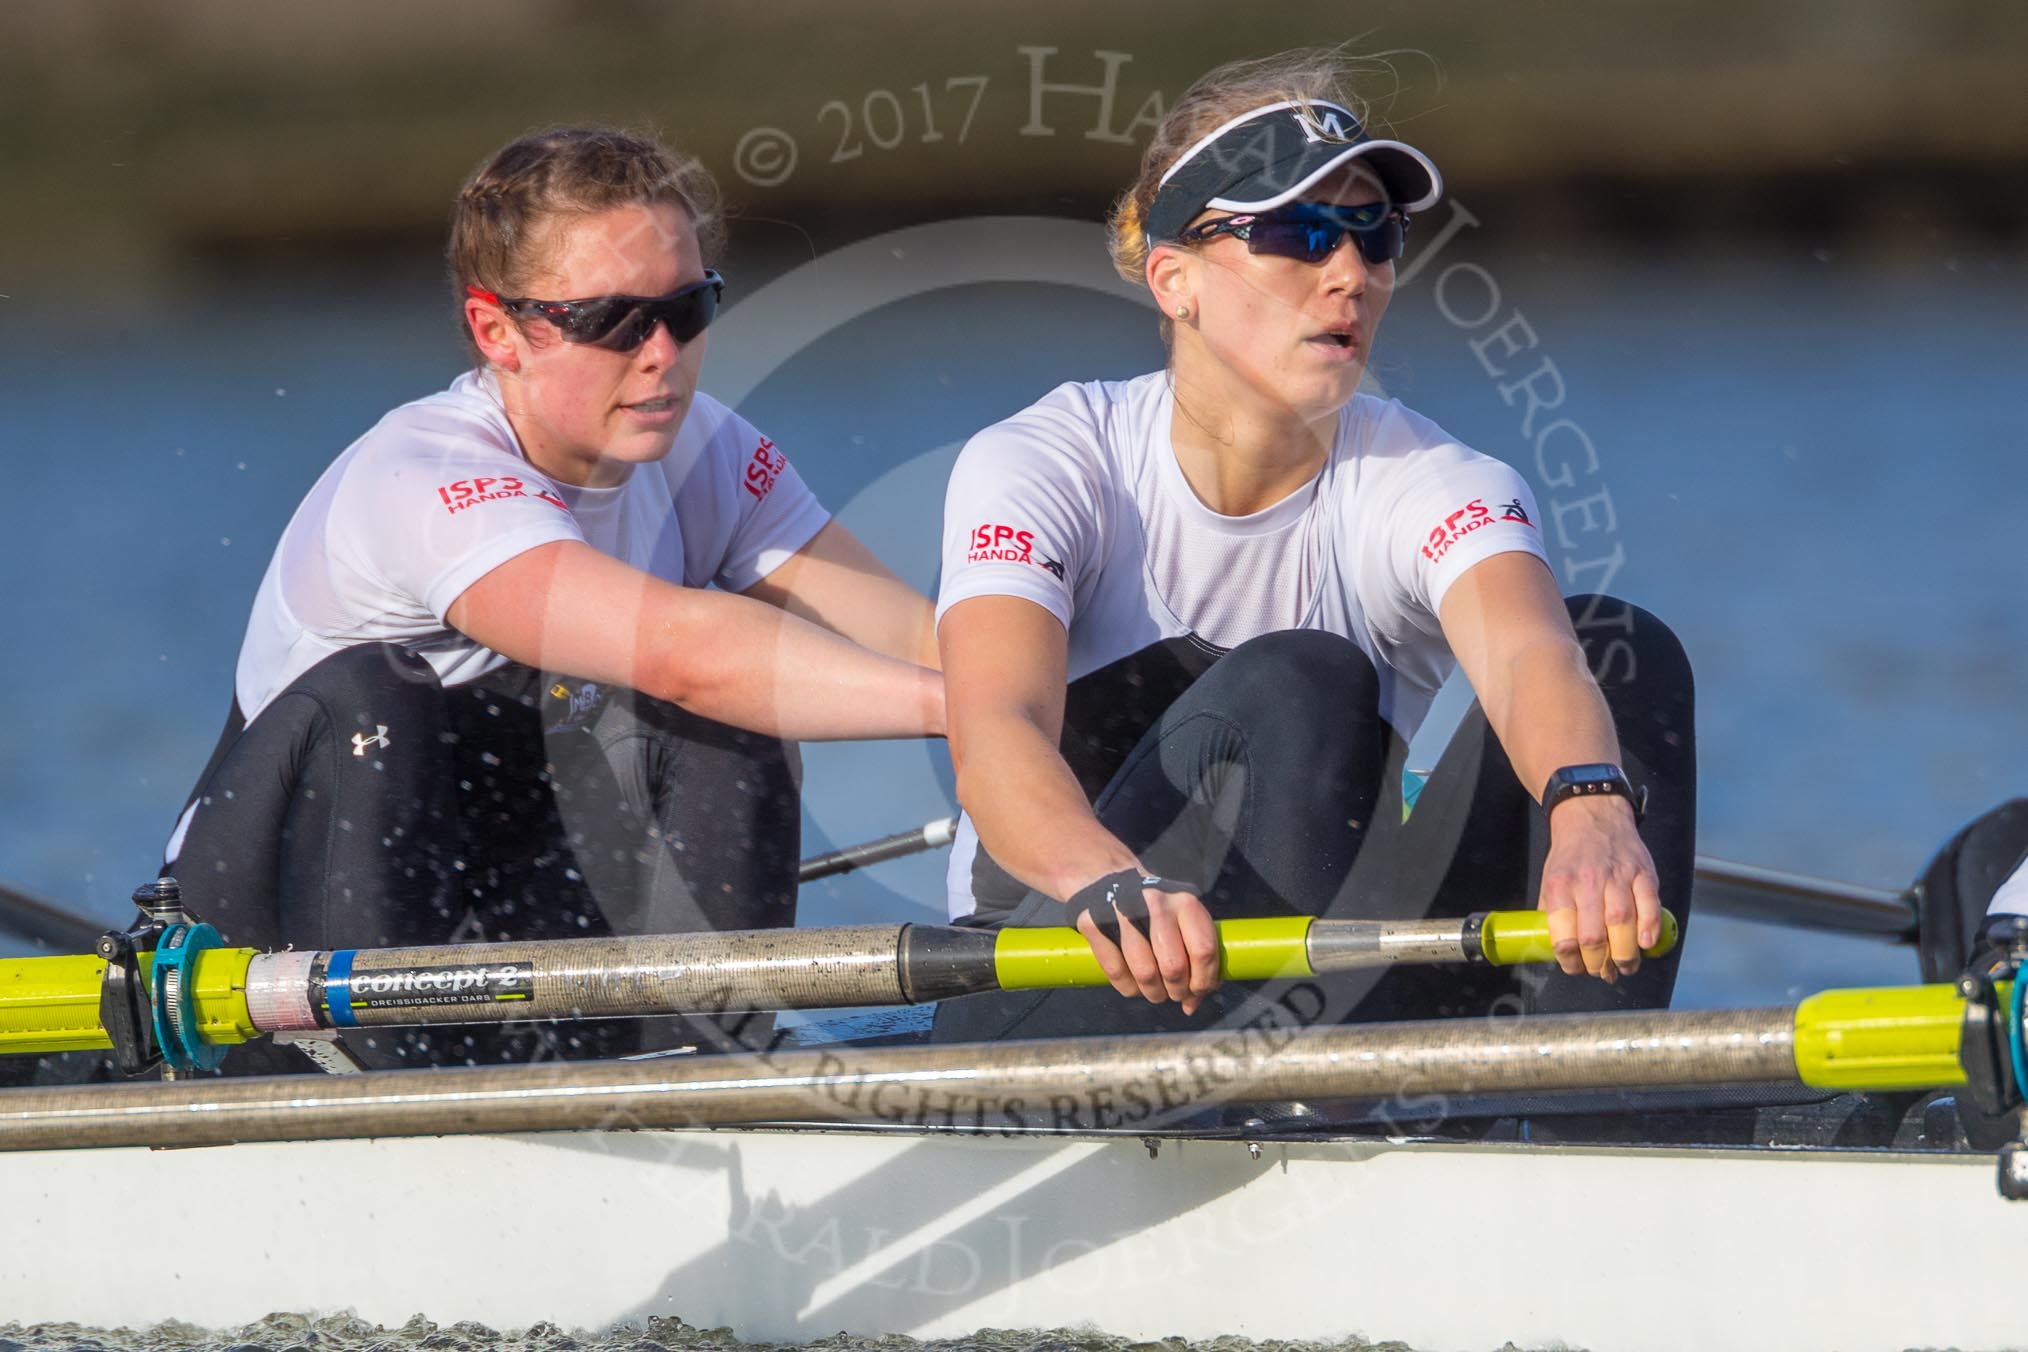 The Cancer Research UK Boat Race season 2017 - Women's Boat Race Fixture OUWBC vs Molesey BC: The Molesey boat, here 5 Katie Bartlett, 6 Elo Luik.
River Thames between Putney Bridge and Mortlake,
London SW15,

United Kingdom,
on 19 March 2017 at 16:05, image #92